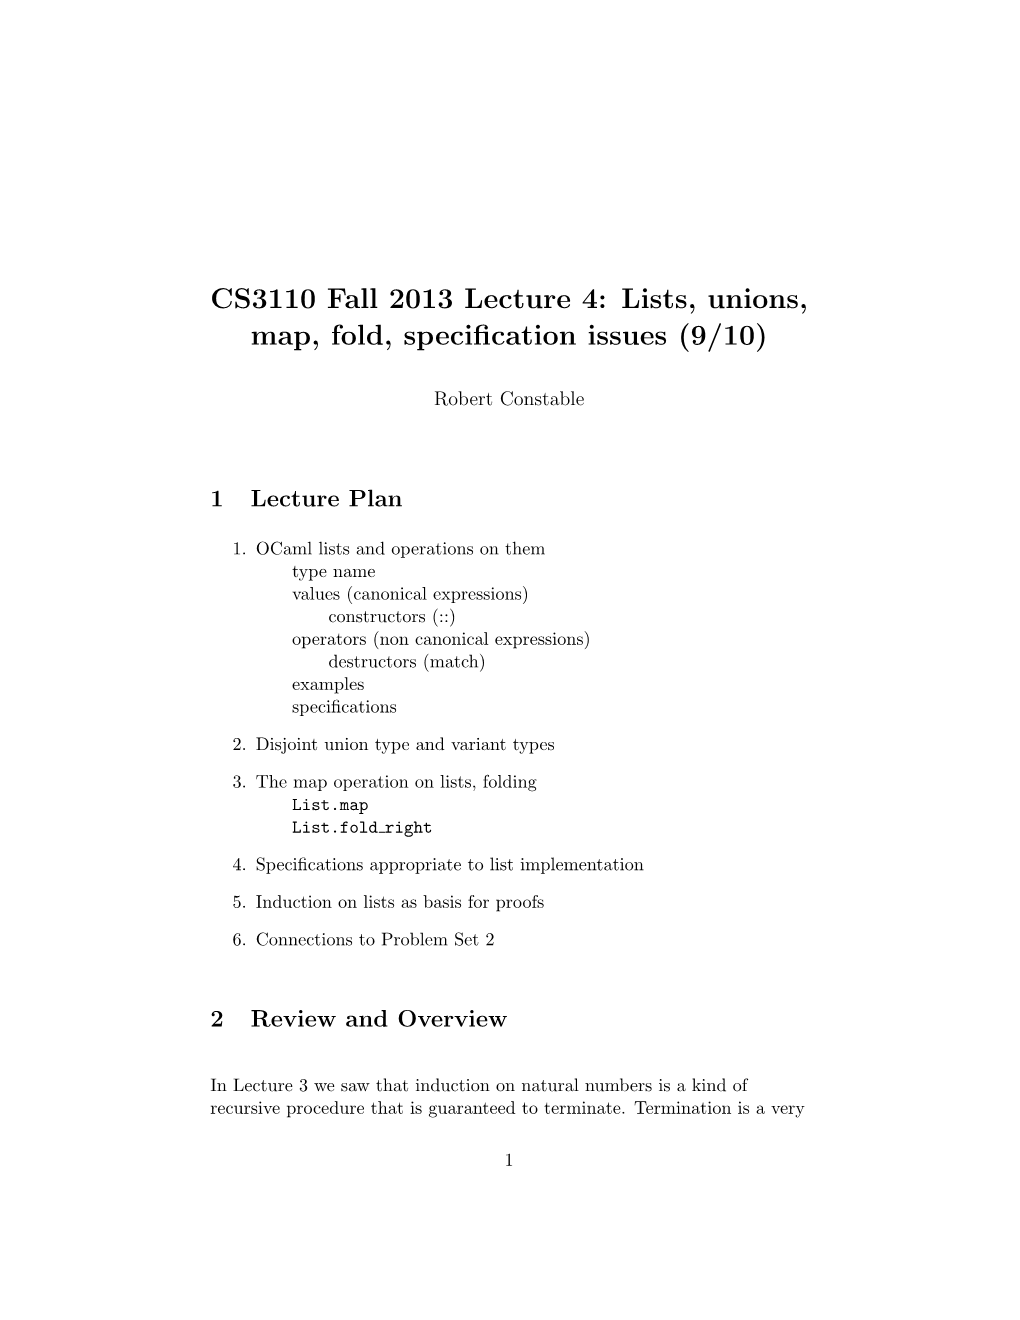 CS3110 Fall 2013 Lecture 4: Lists, Unions, Map, Fold, Specification Issues